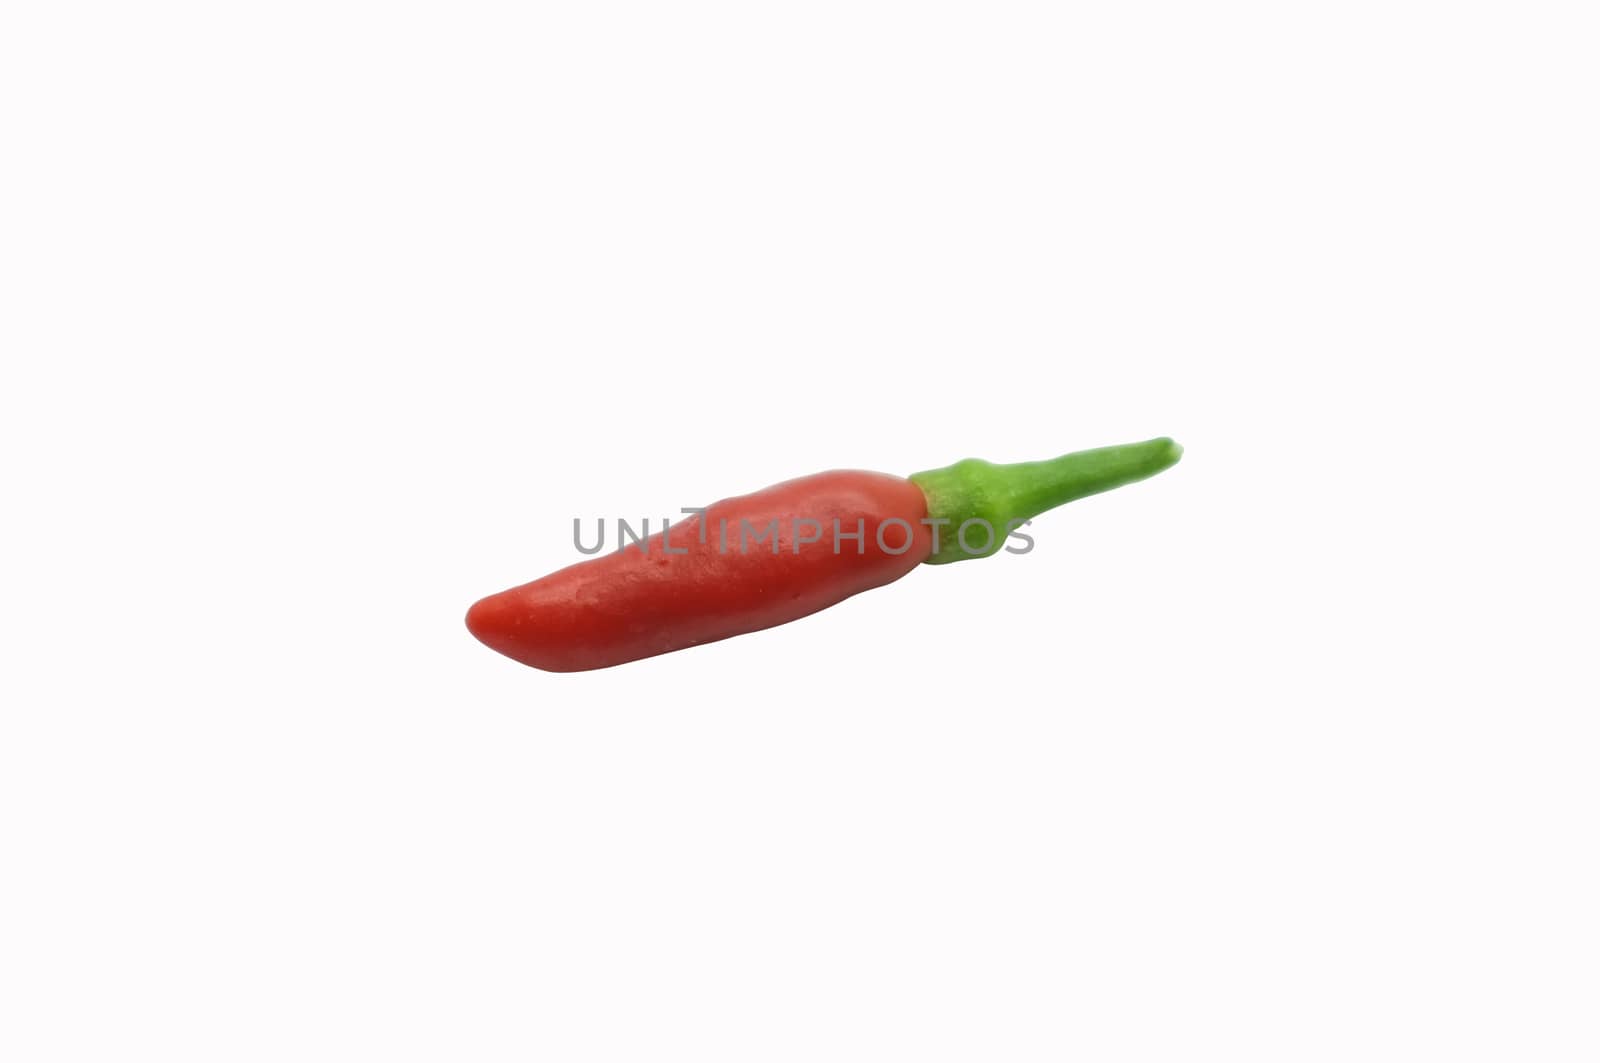 Thai chili pepper, red and green colors